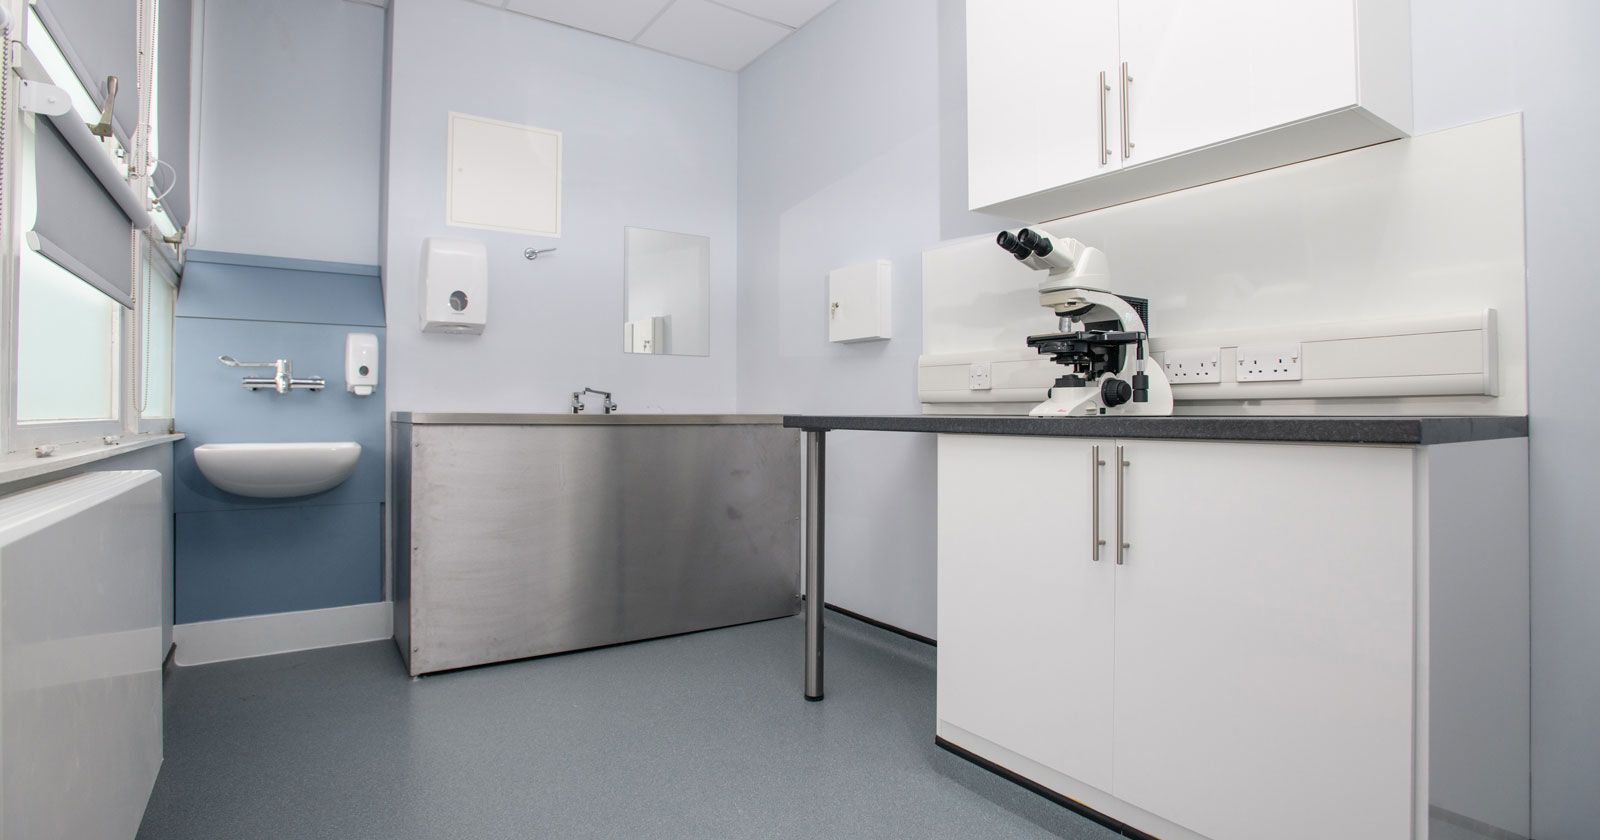 Queensgate Medical Centre Consultation Room with Sink Installed by APSS